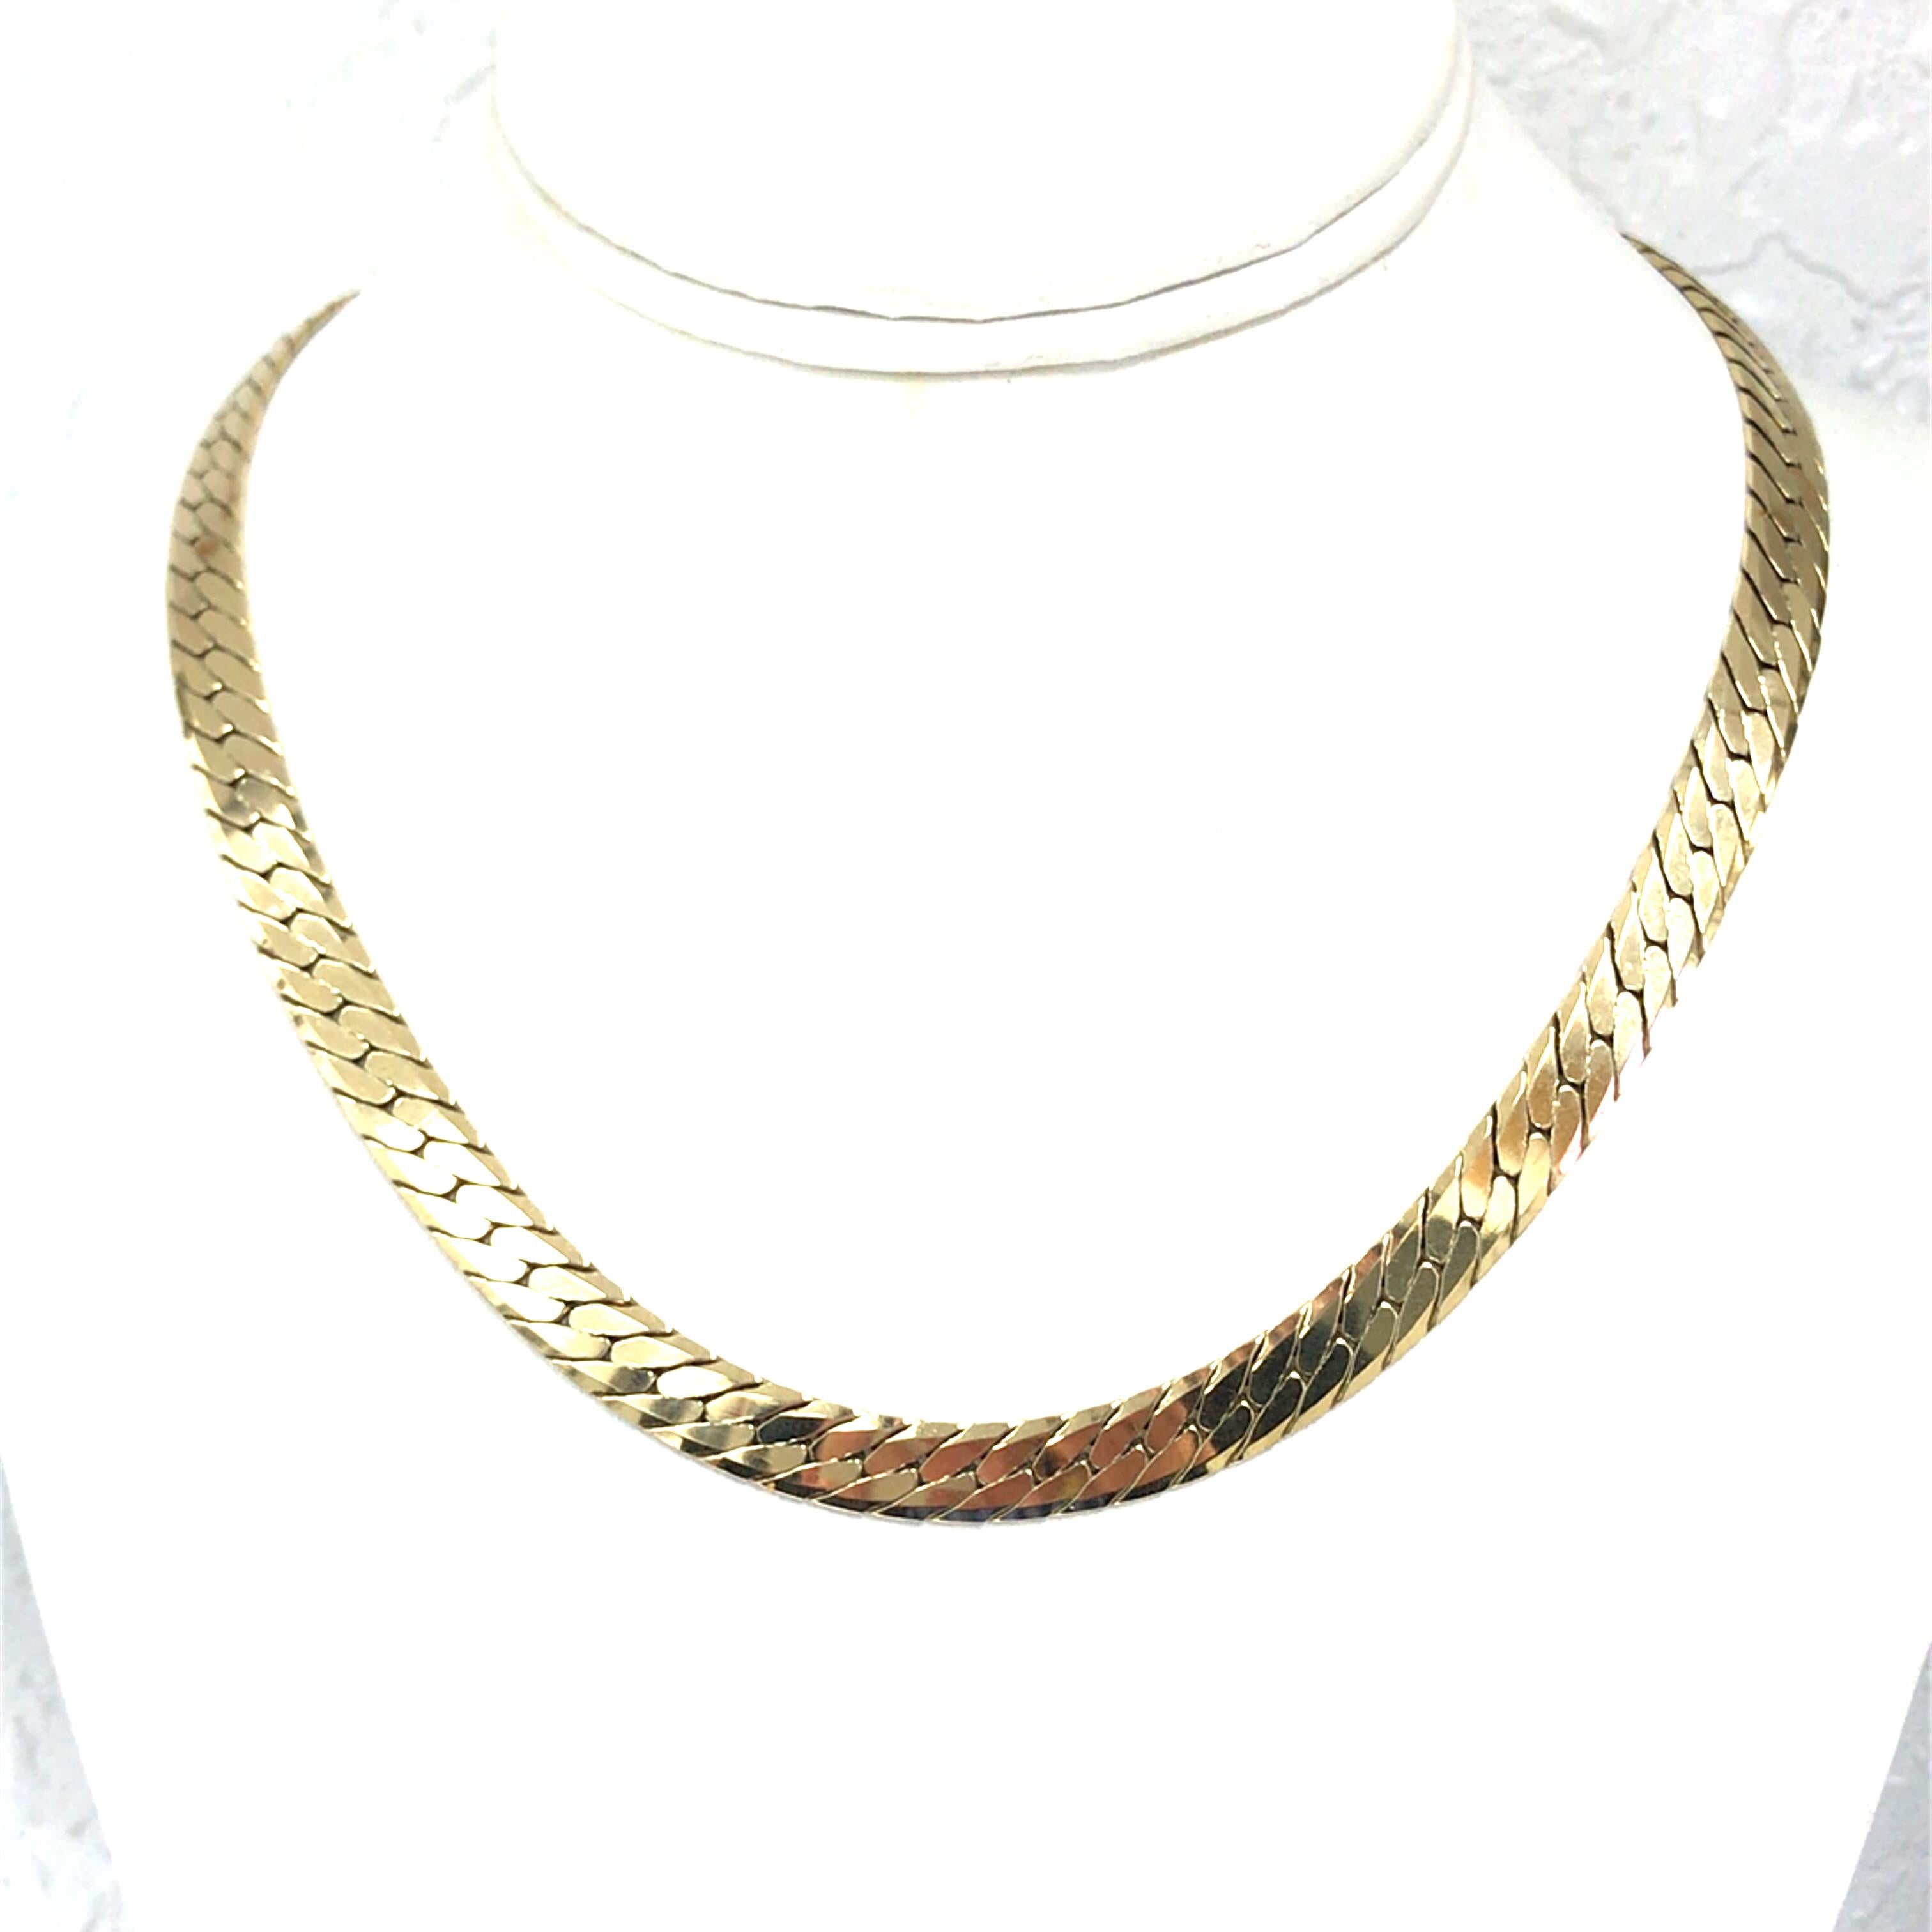 14K Yellow Gold Herringbone Chain.  The Chain measures 18 inch in length and 5/16 inch in width.  44.47 grams.